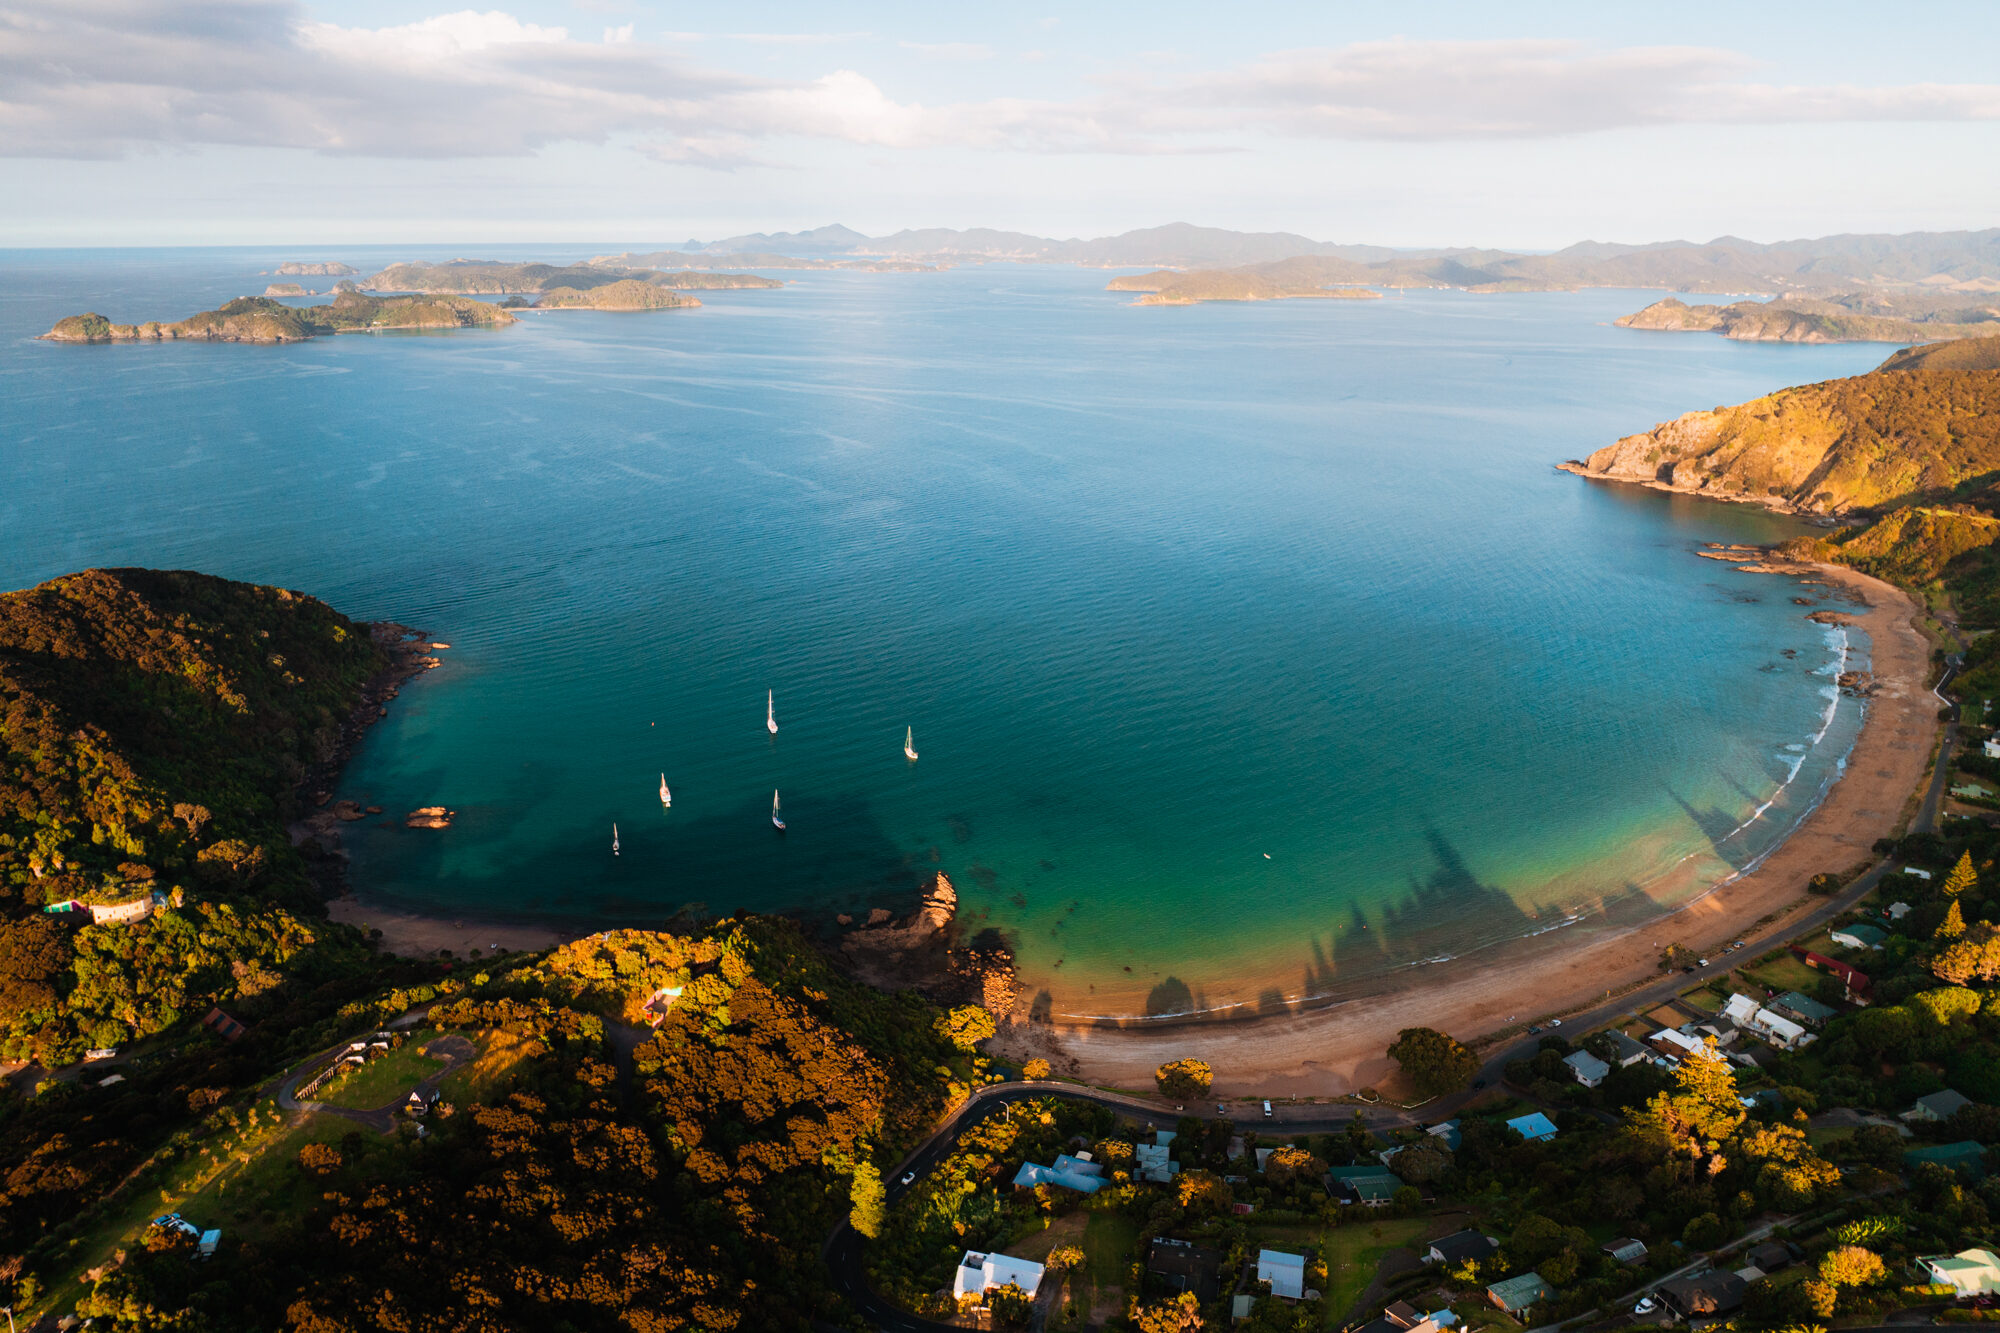 Aerial view over Long Beach - Cloud, Bay of Islands, New Zealand